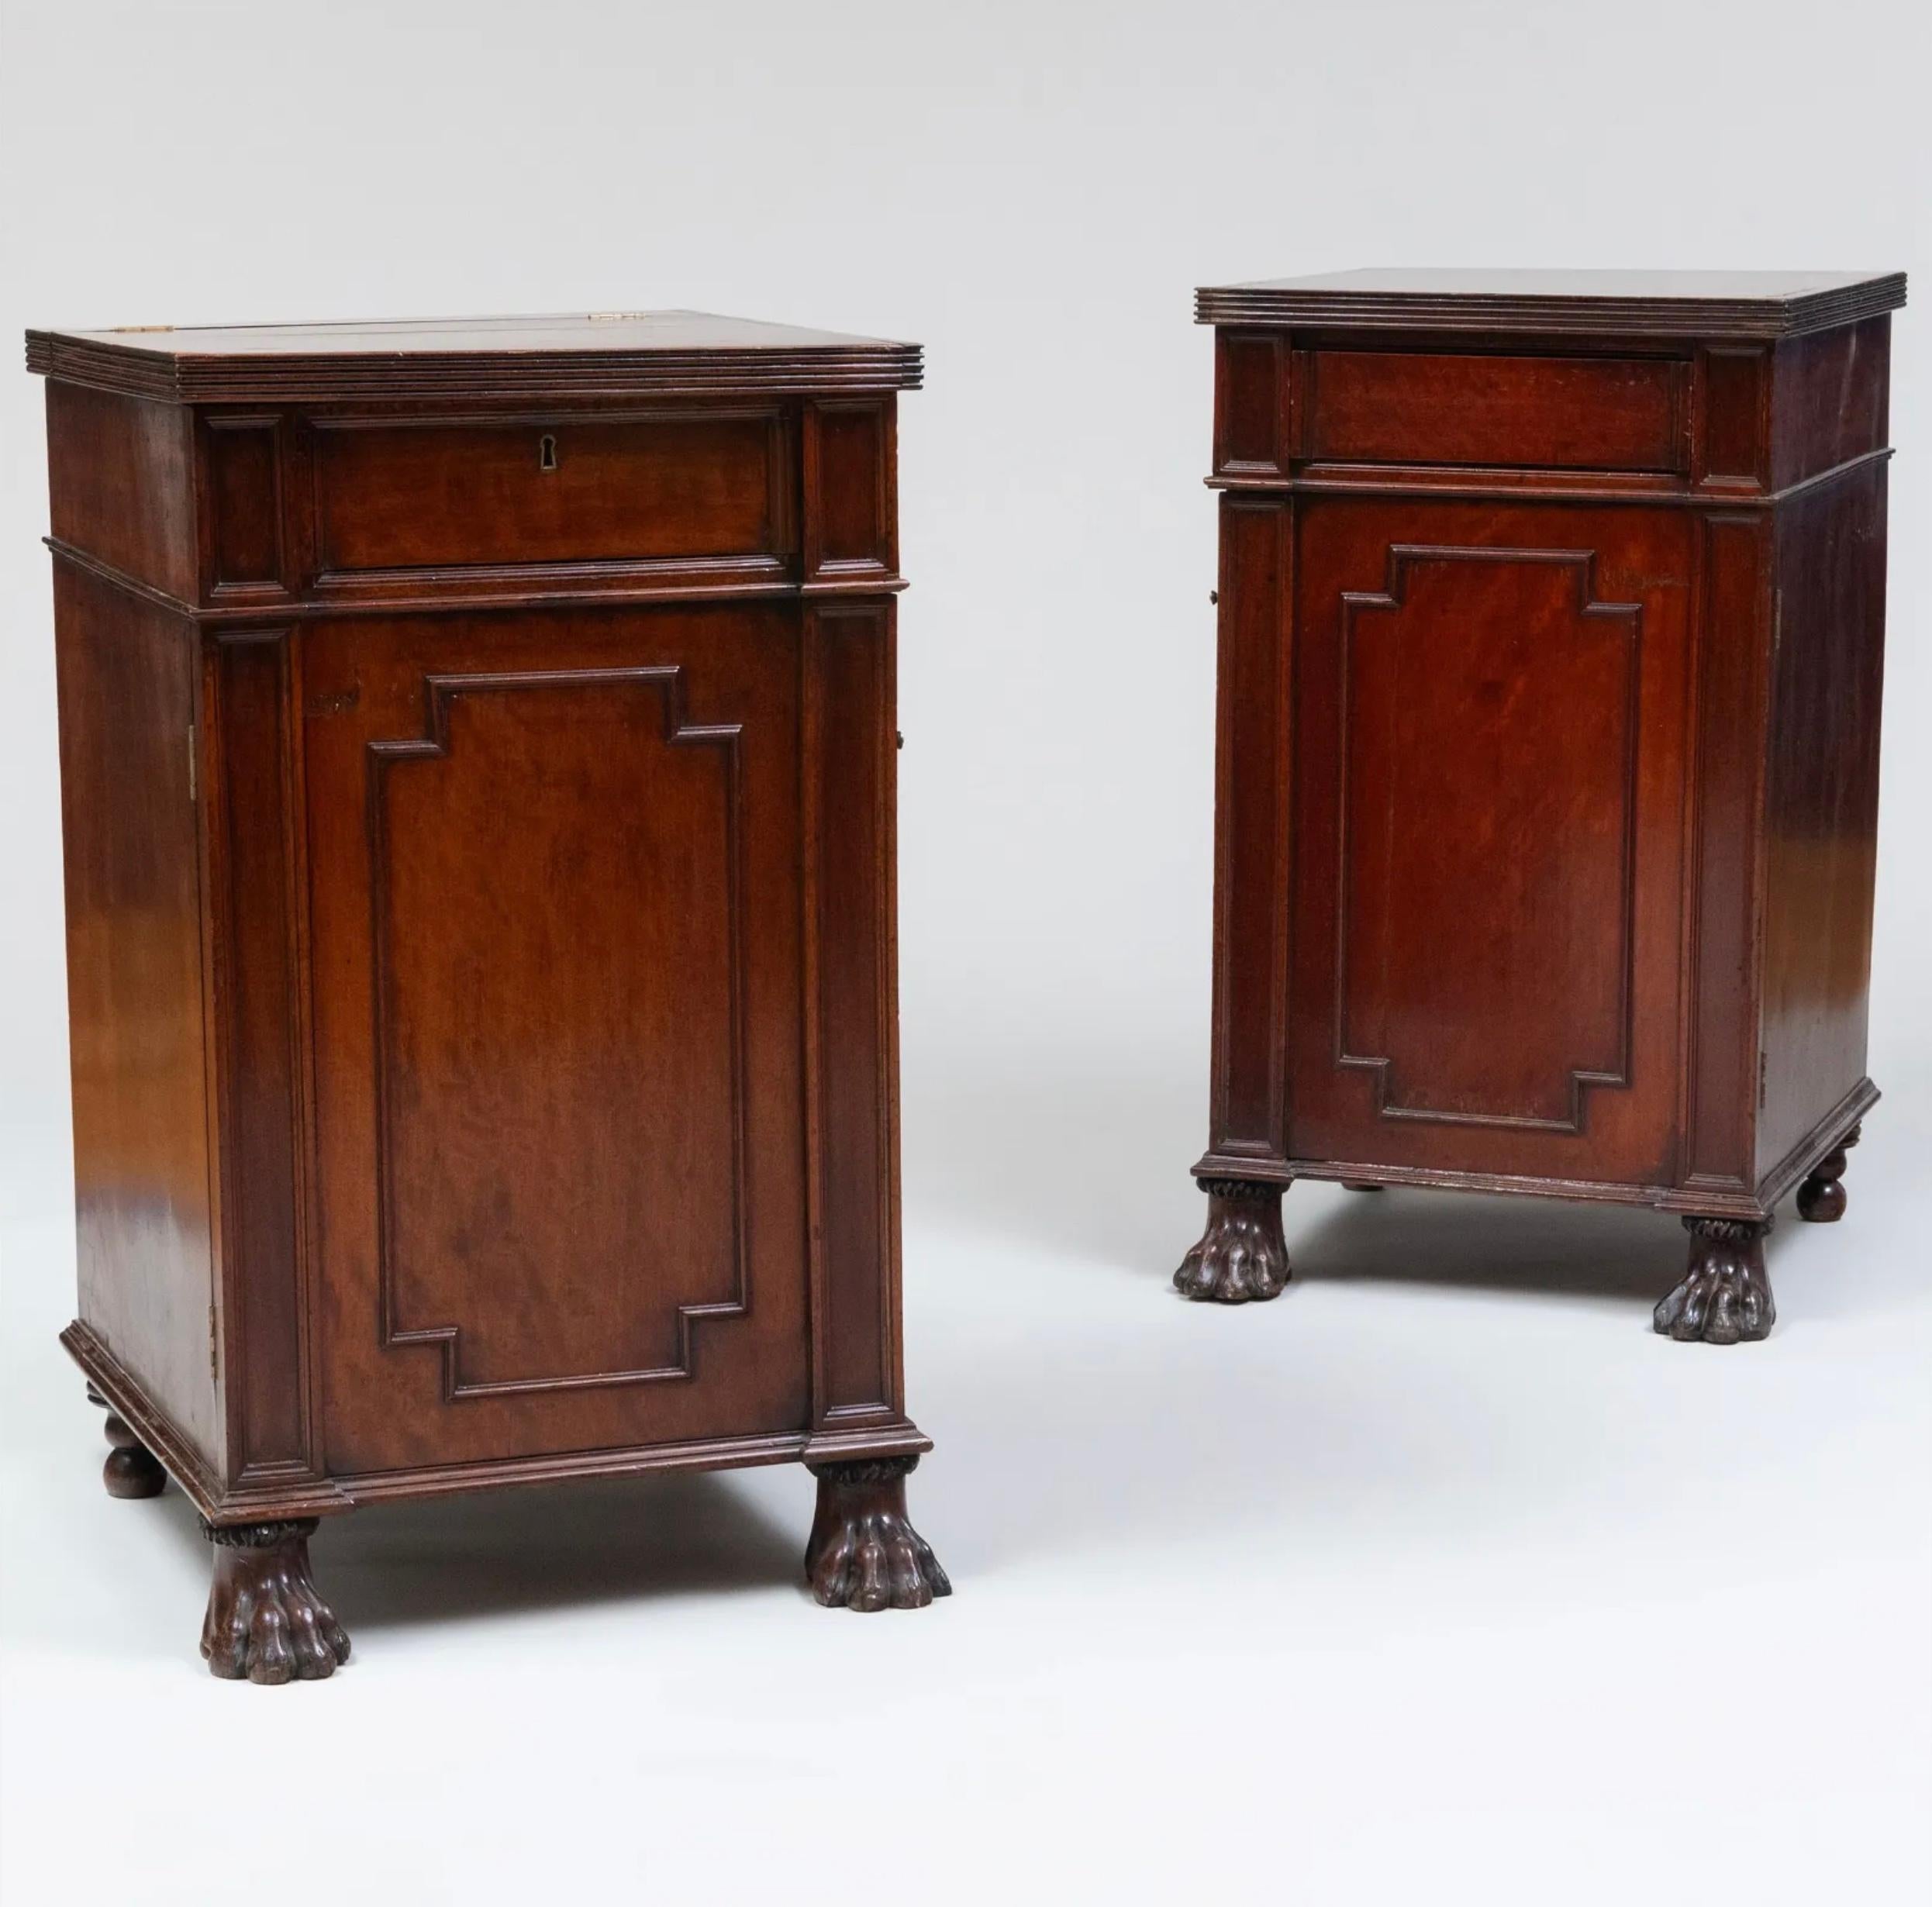 A wonderful pair of George III Mahogany Pedestal Cabinets - individually made and not believed to or have evidence of being a part of a larger sideboard. 

Both tops open and are accessible revealing the original interior. One pedestal opens to a